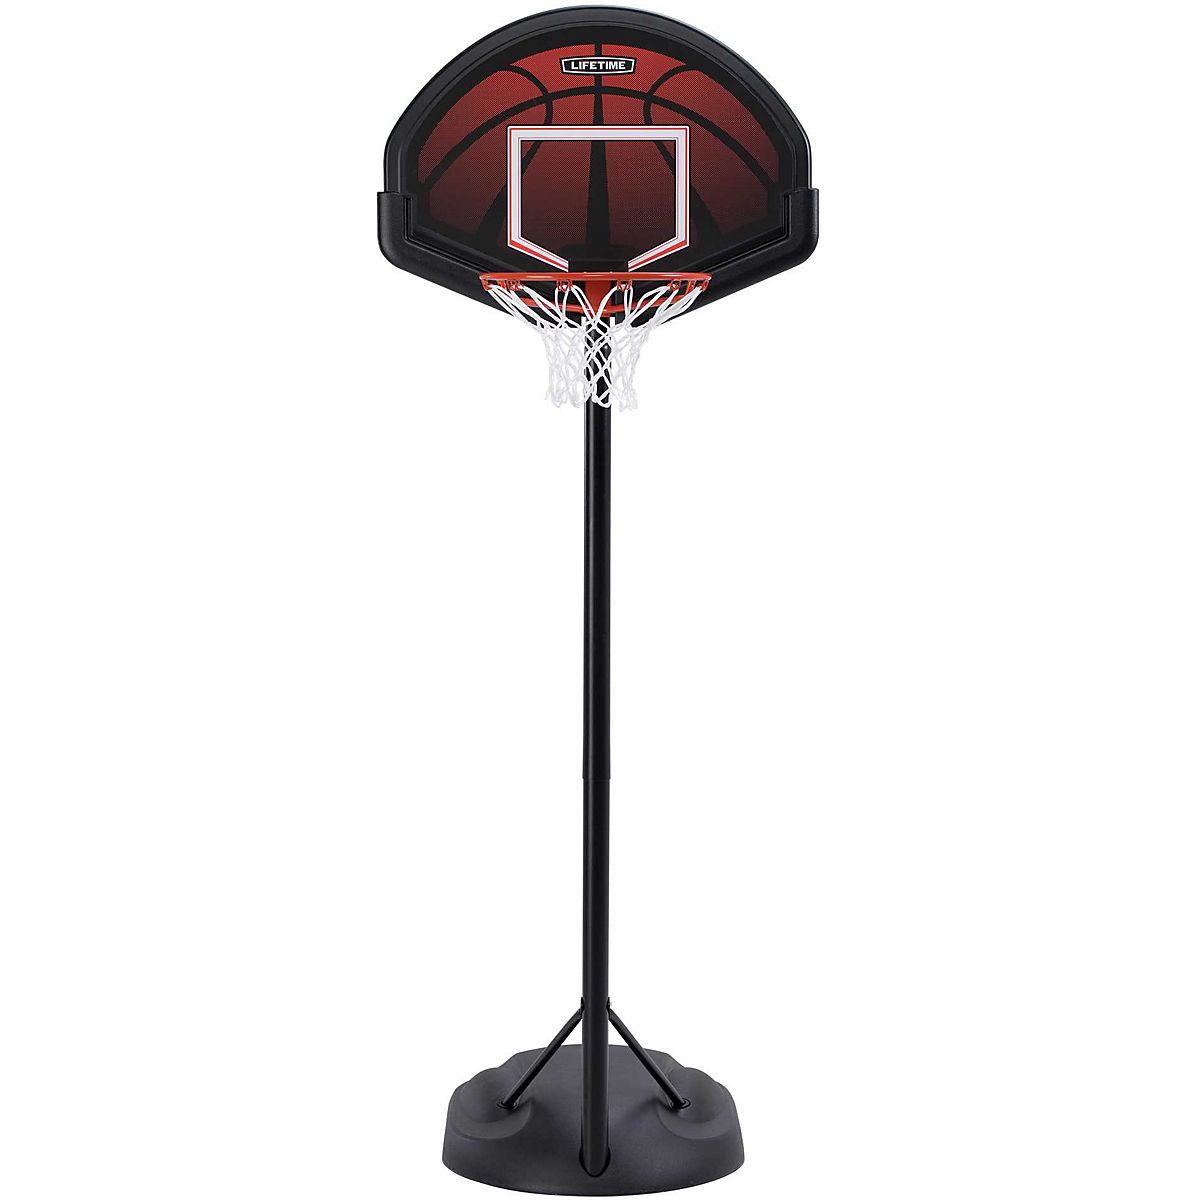 Mini Kids Basketball Toy Set Indoor Adjustable Suspension Basketball Hoop and Ball Set for Toddlers Youth Children 